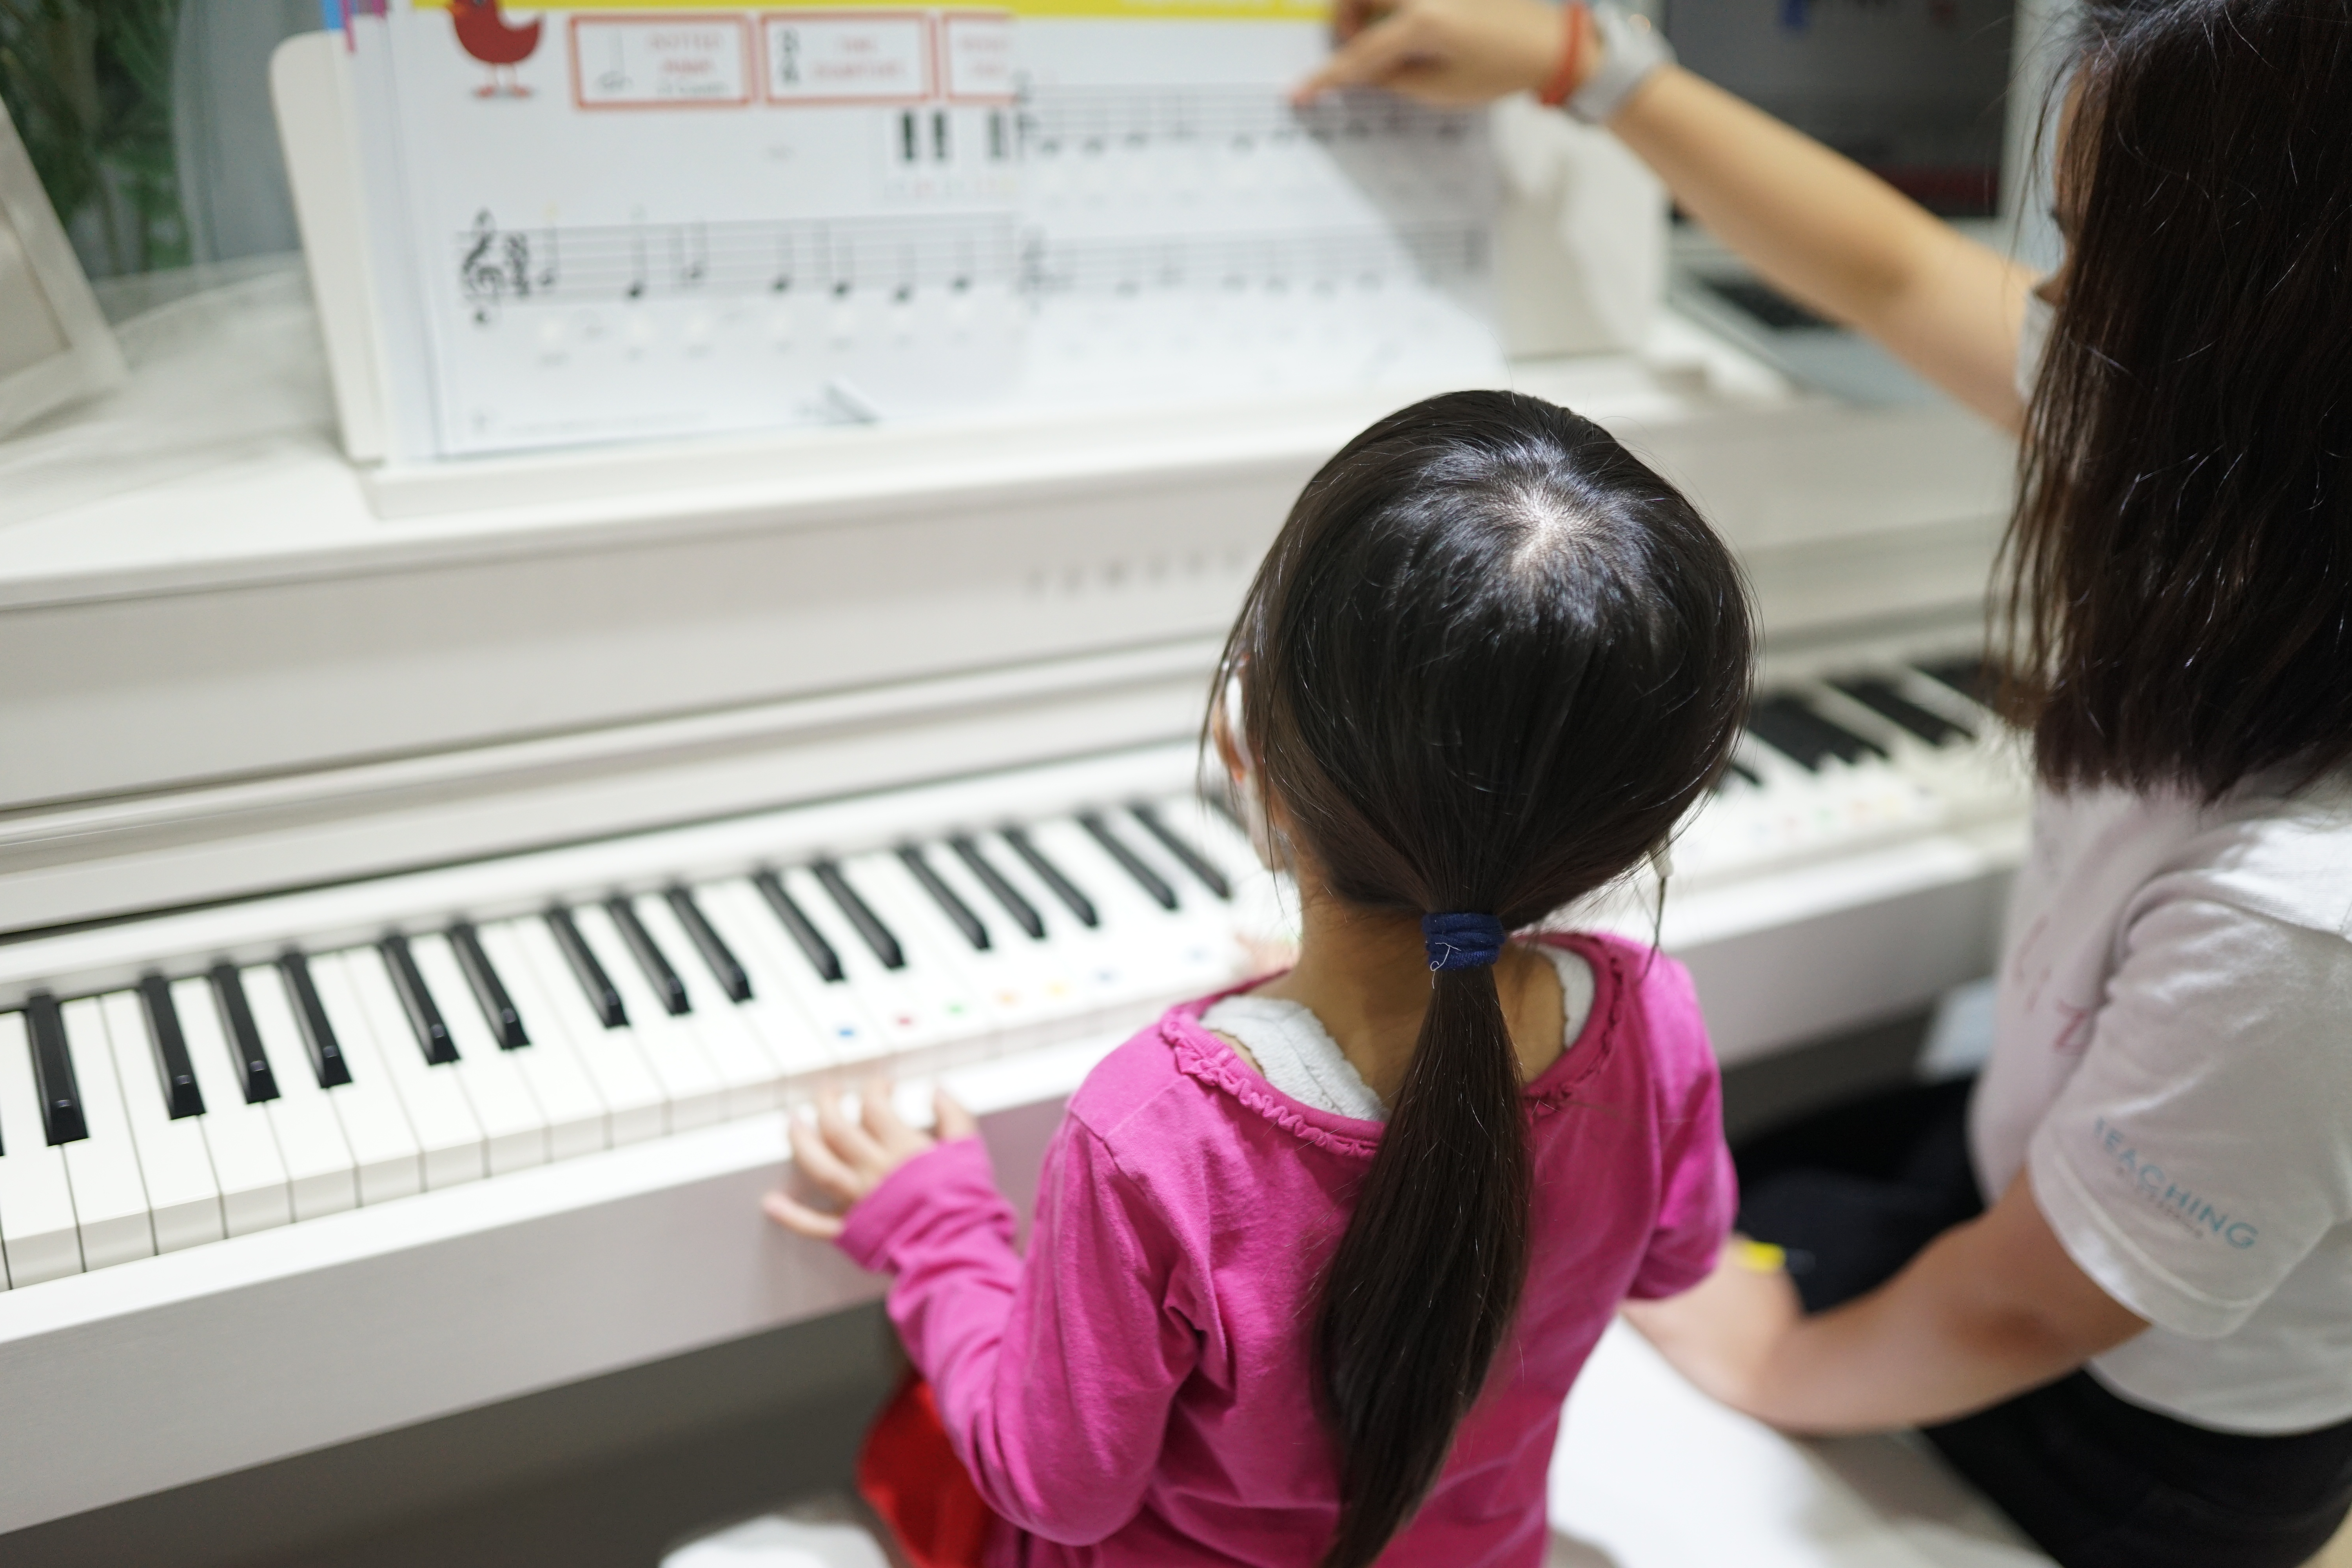 Your 3-year-old can be a Little Pianist Prodigy too.